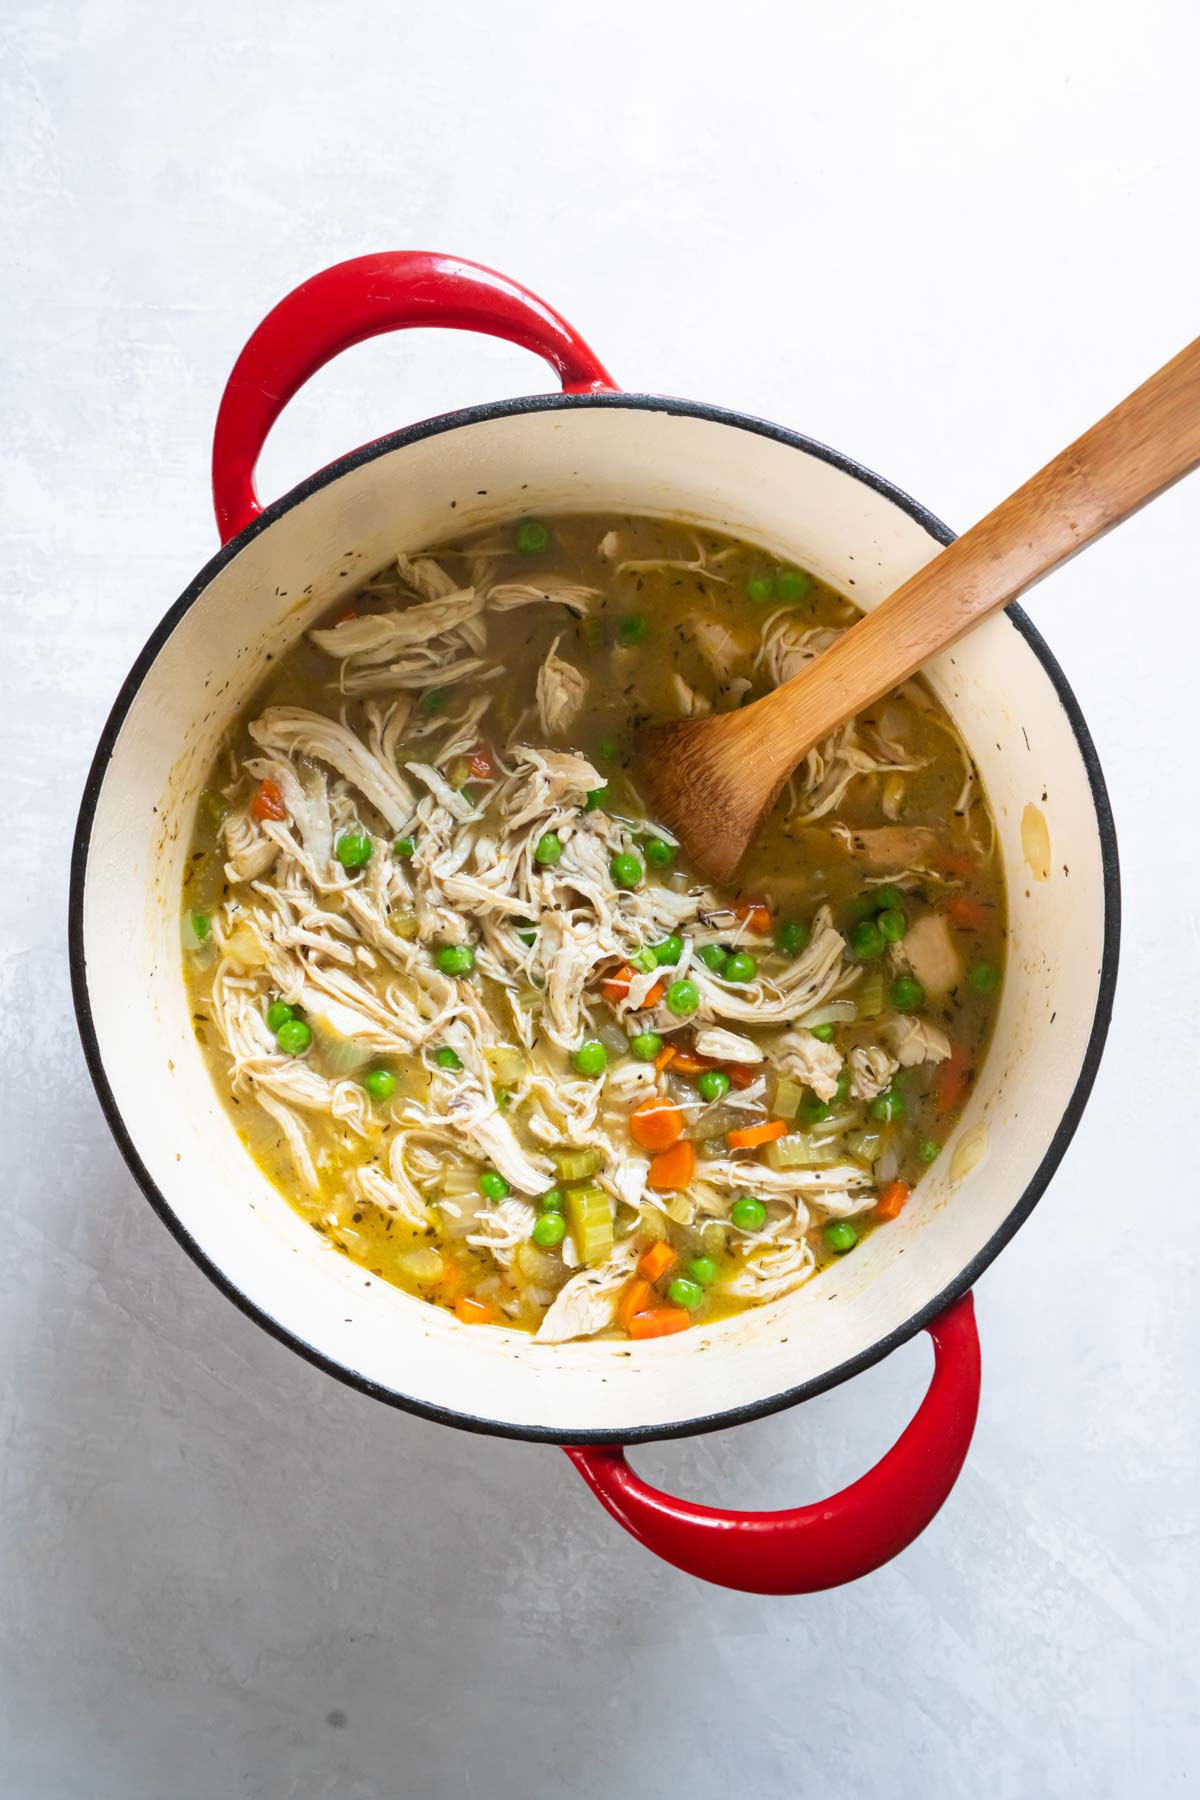 Shredded chicken and frozen peas stirred into soup.